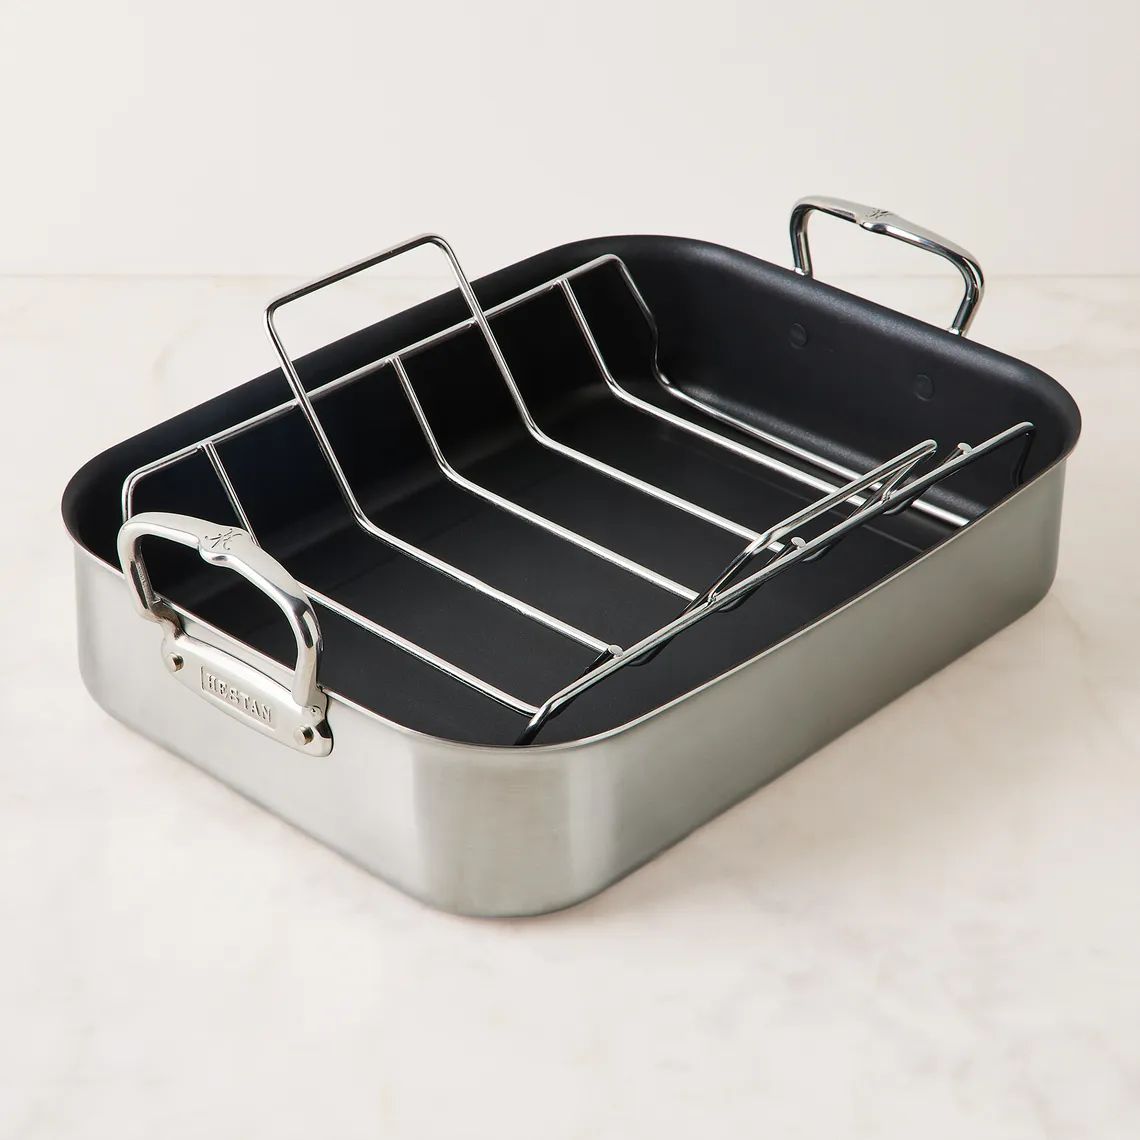 Hestan Provisions Nonstick Stainless-Steel Roaster With Rack | Food52